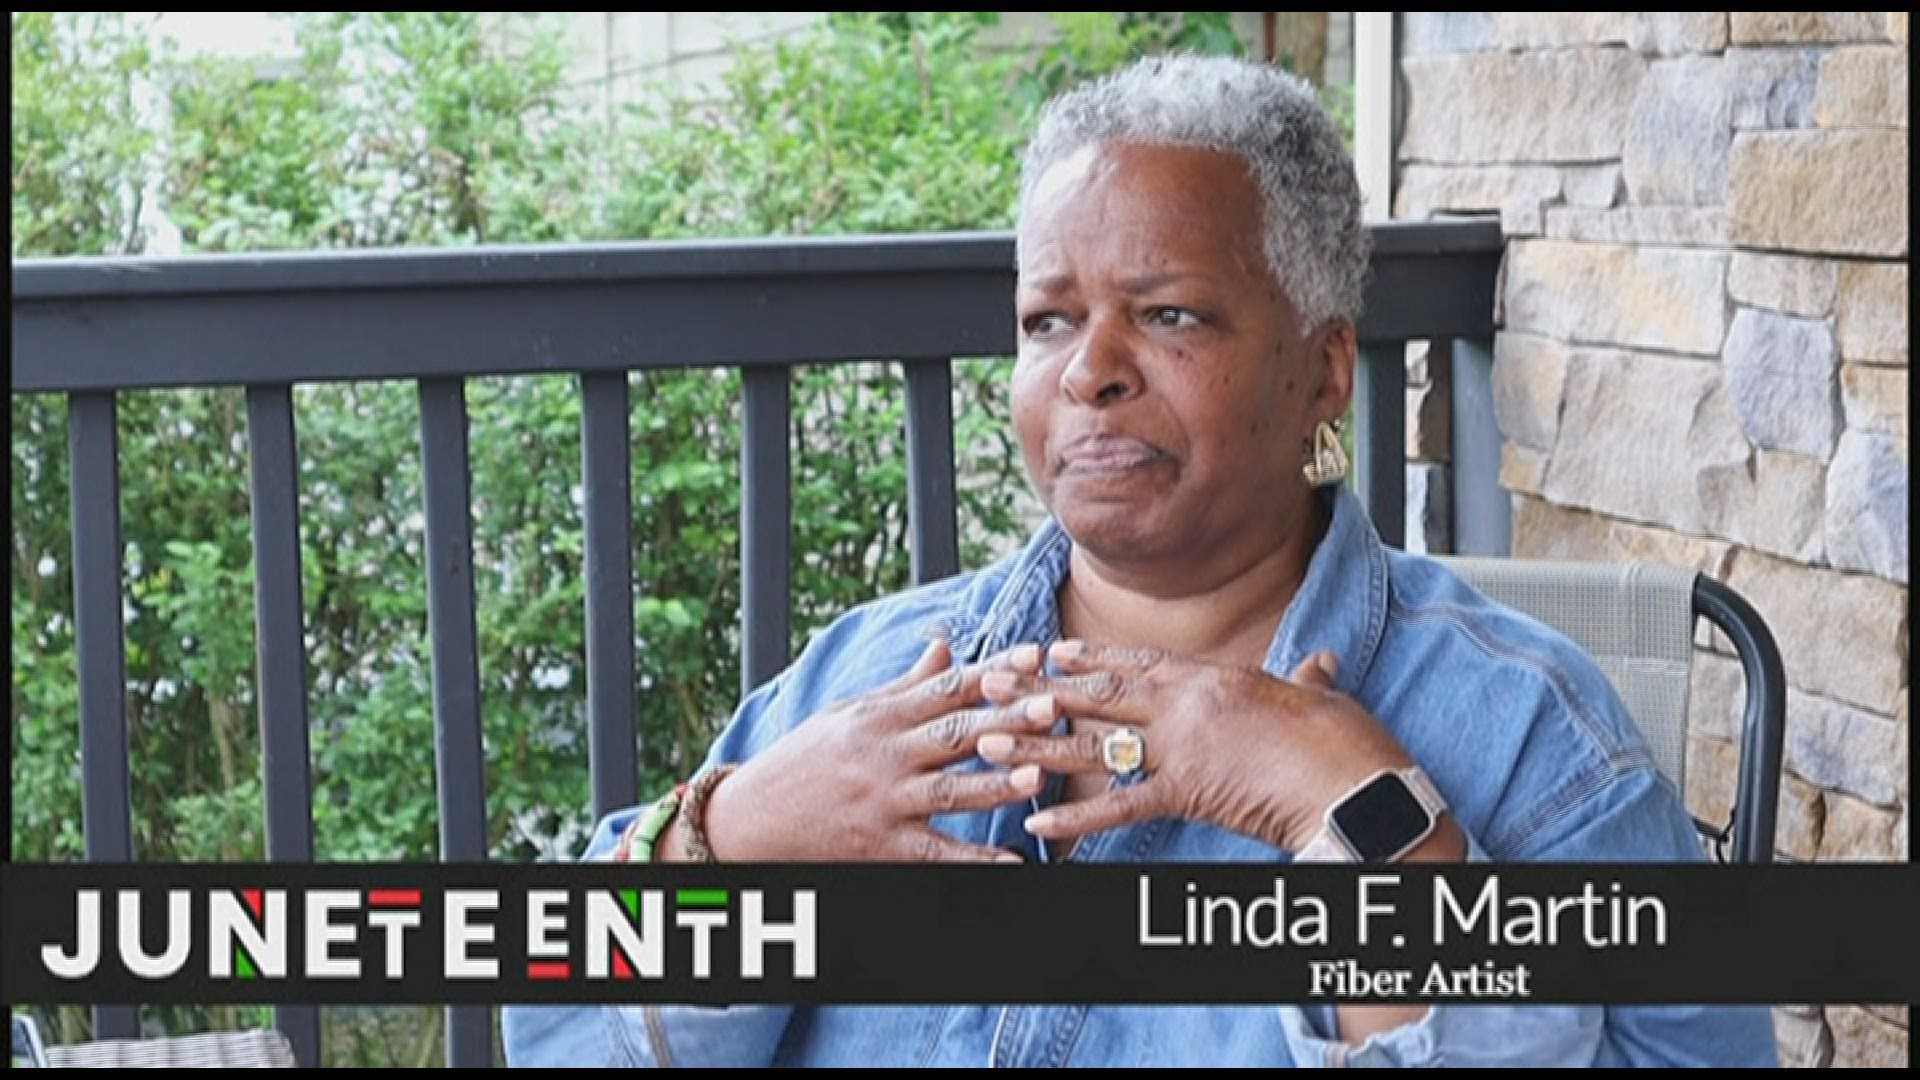 Linda F. Martin, a more than 20-year resident of Hartford, sat down to talk about her matriarch Mary McKenzie Butts, who was born into slavery in Macon, Georgia.